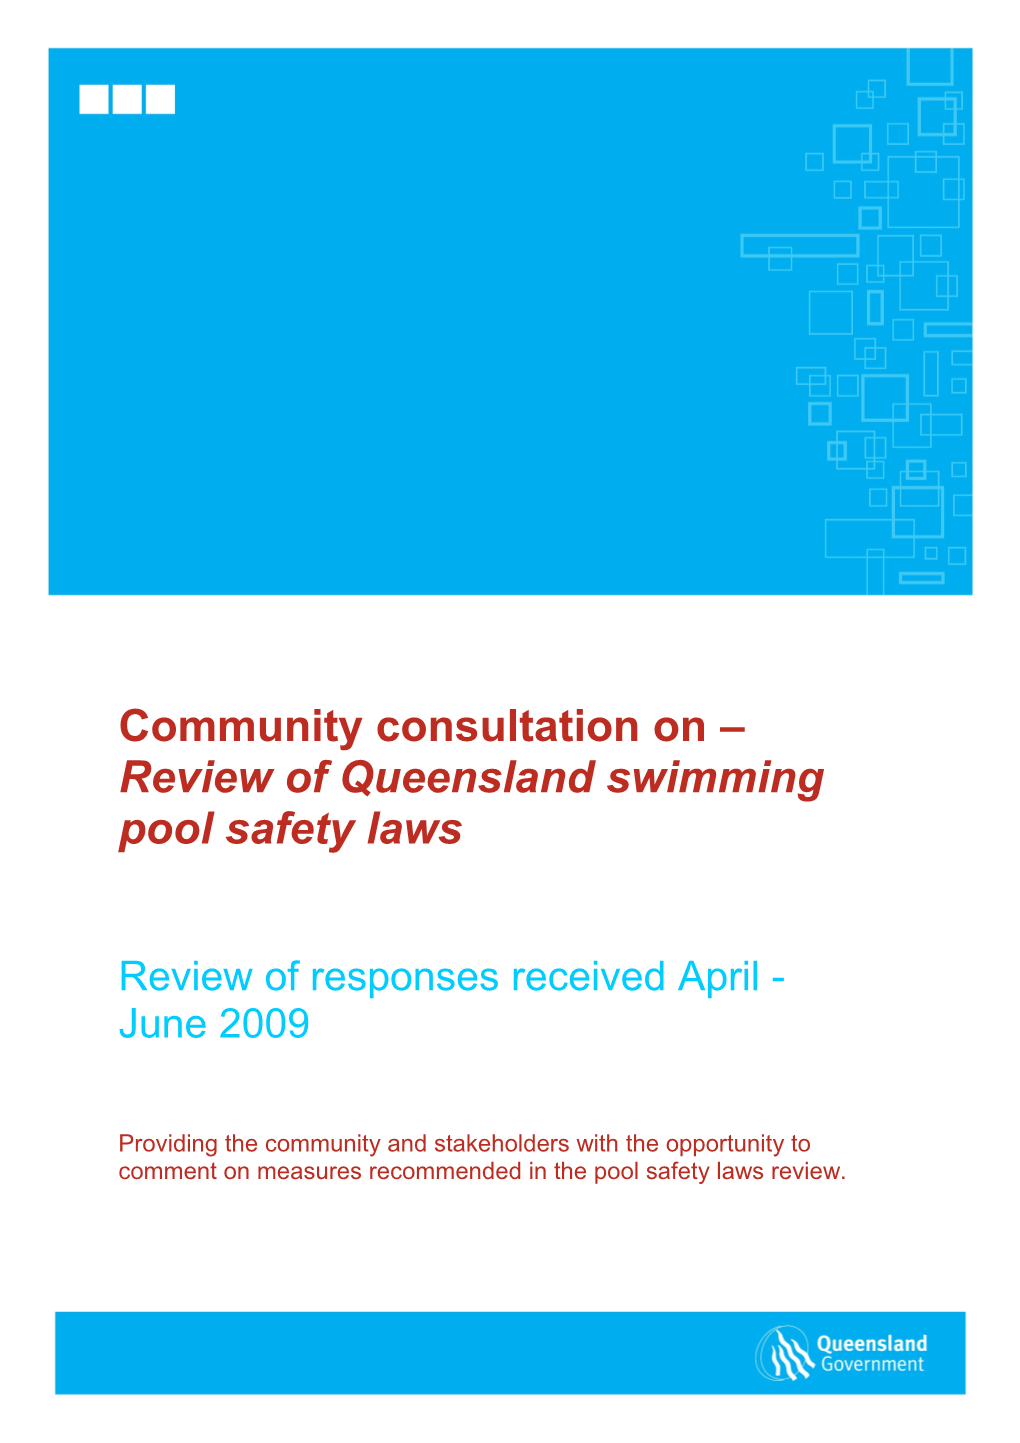 Community Consultation on Review of Queensland Swimming Pool Safety Laws